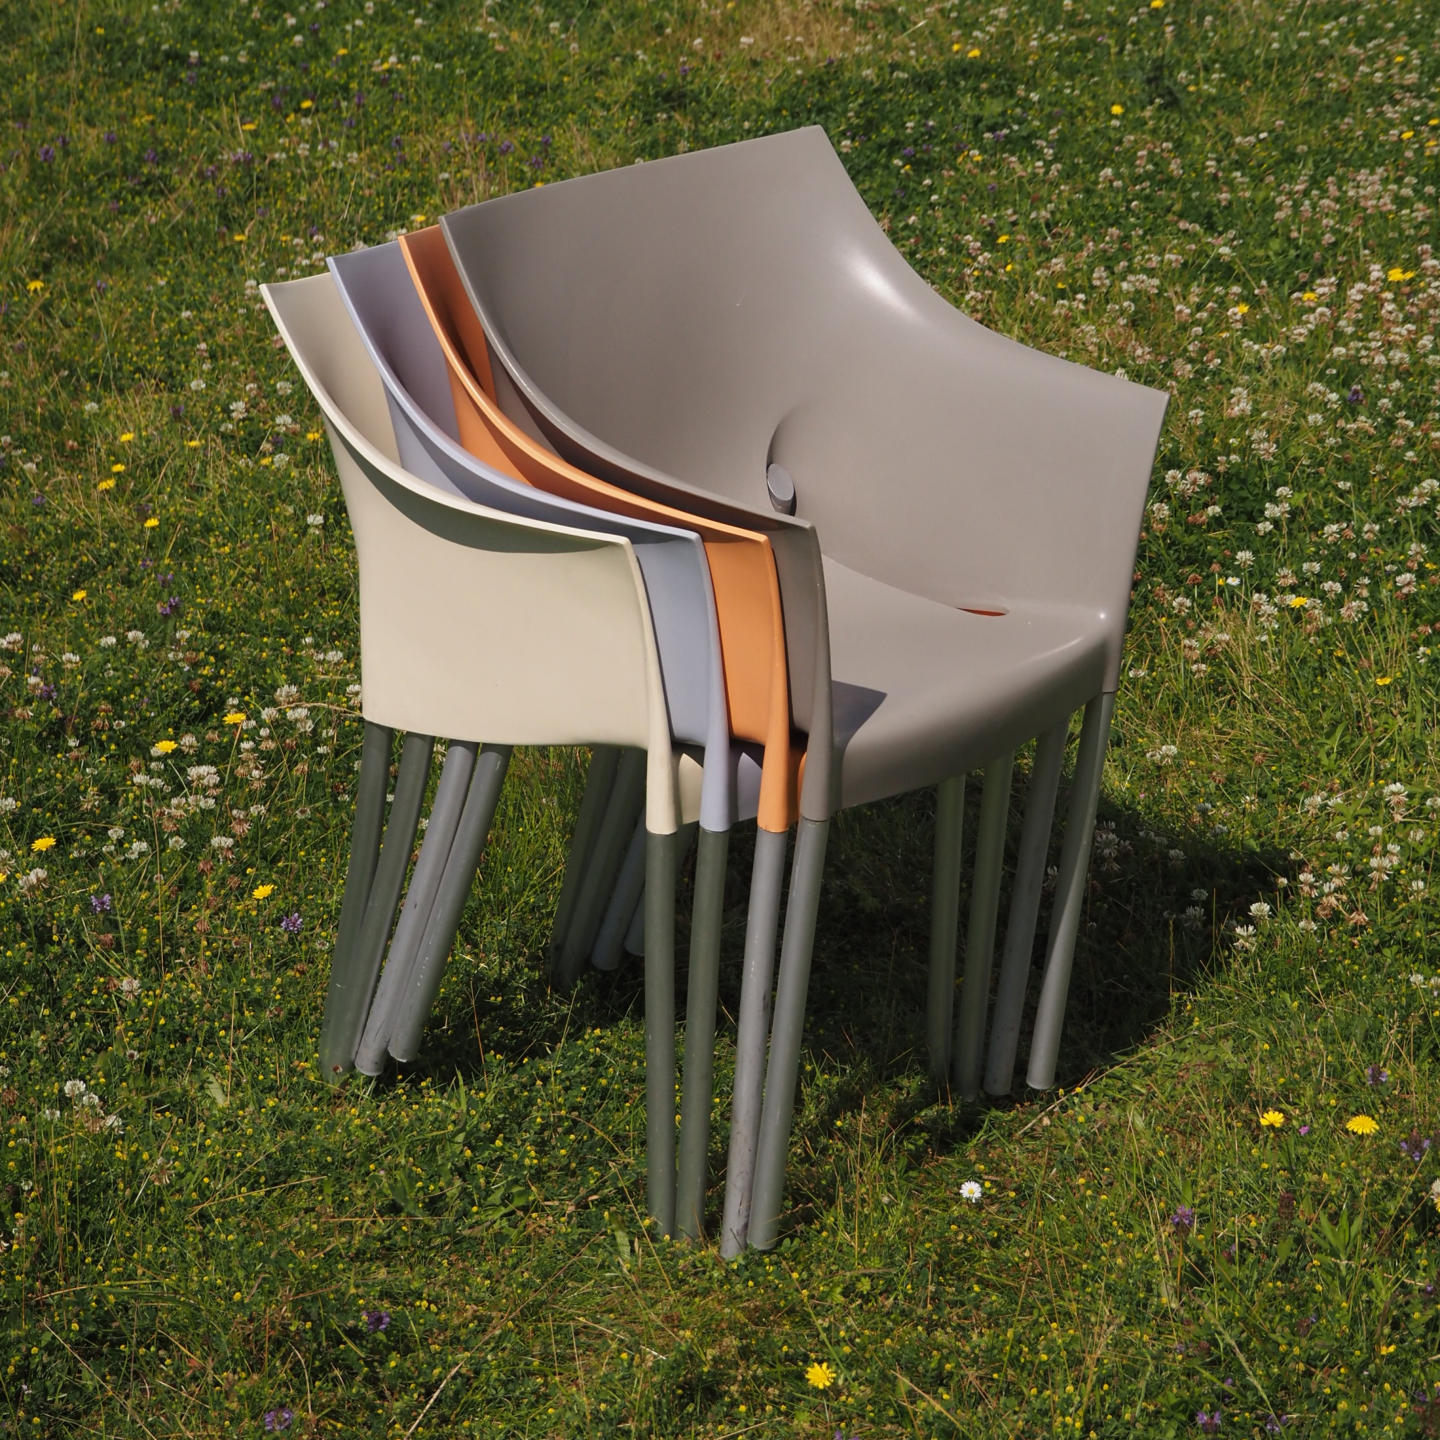 Armchair 'Dr. NO' by Philippe Starck for Kartell (ca. 1997) - Cream